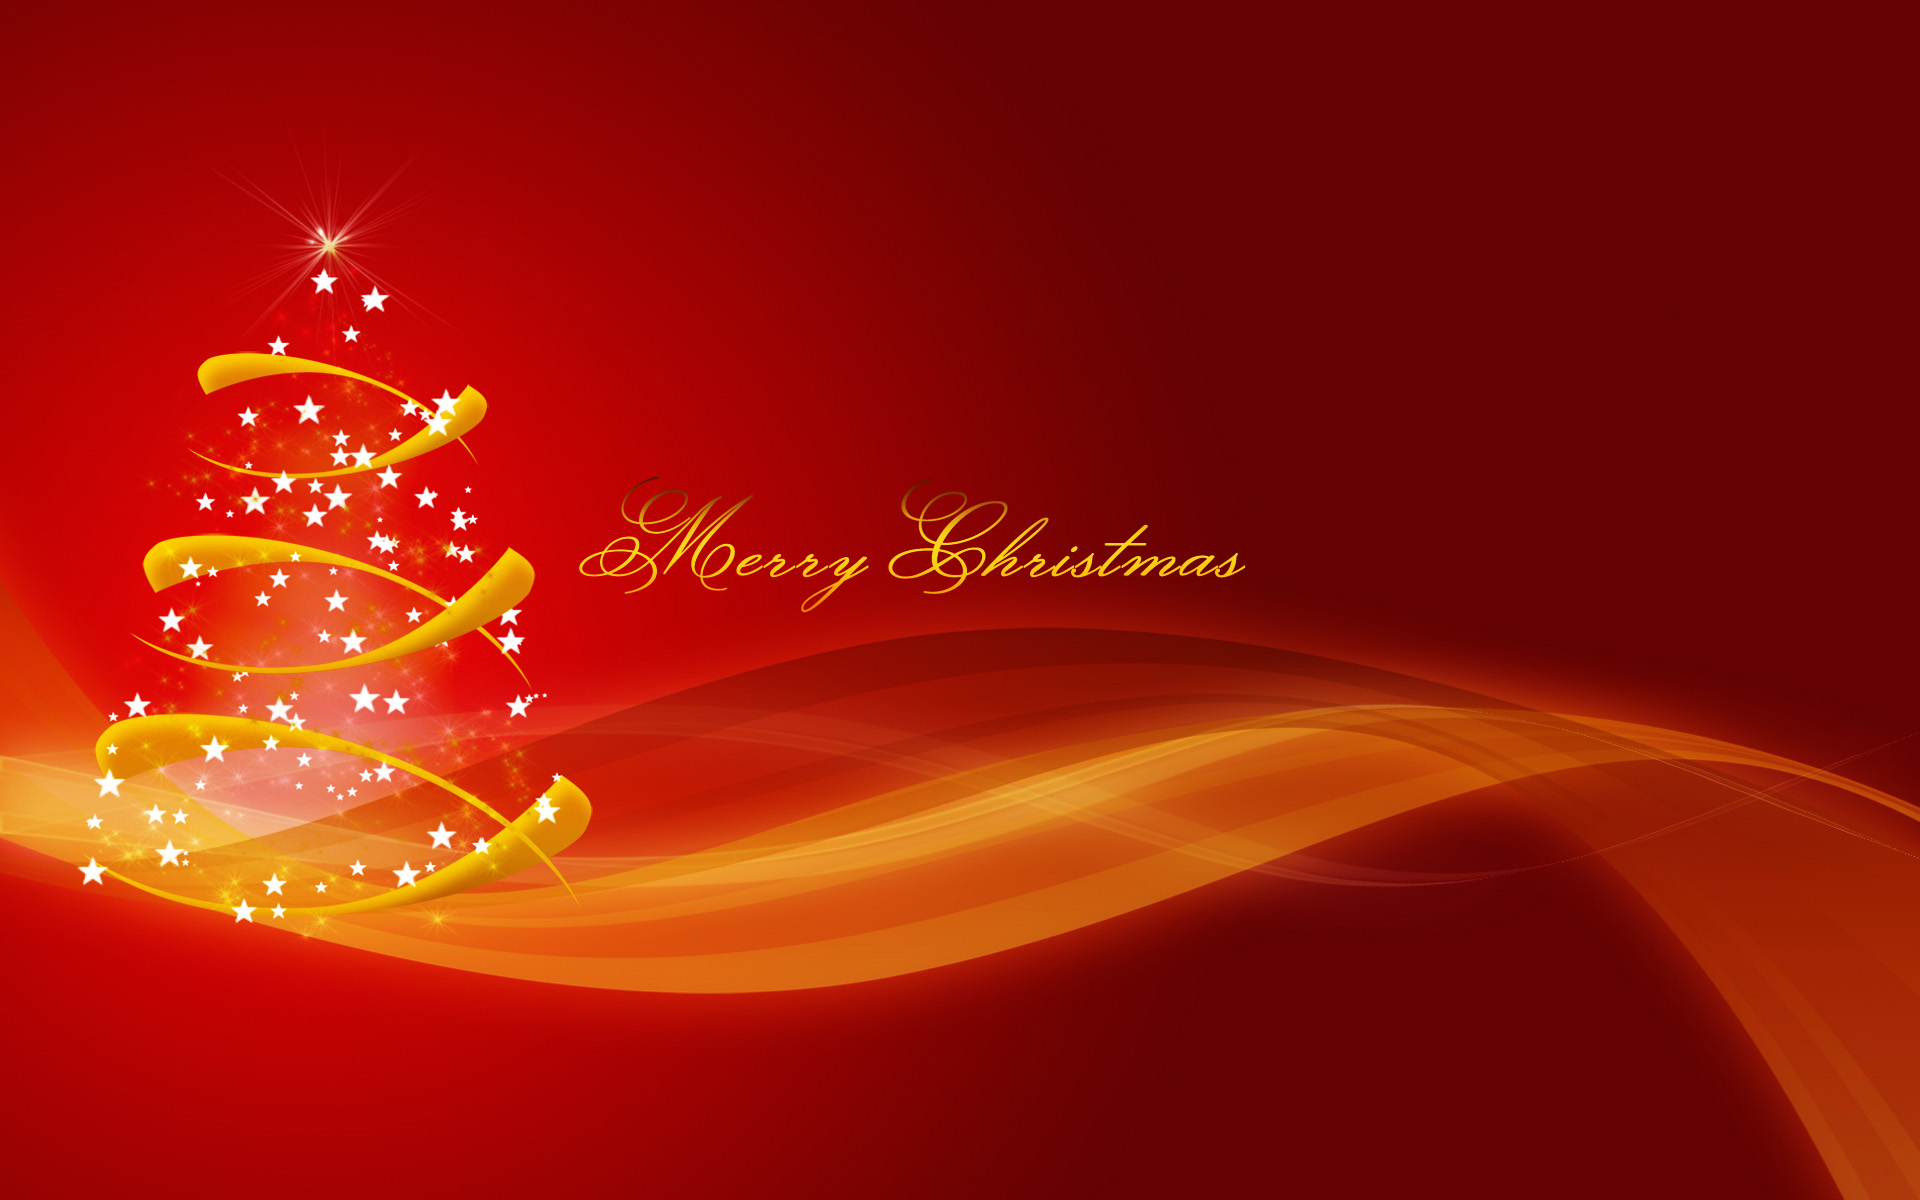 merry christmas wallpapers widescreen